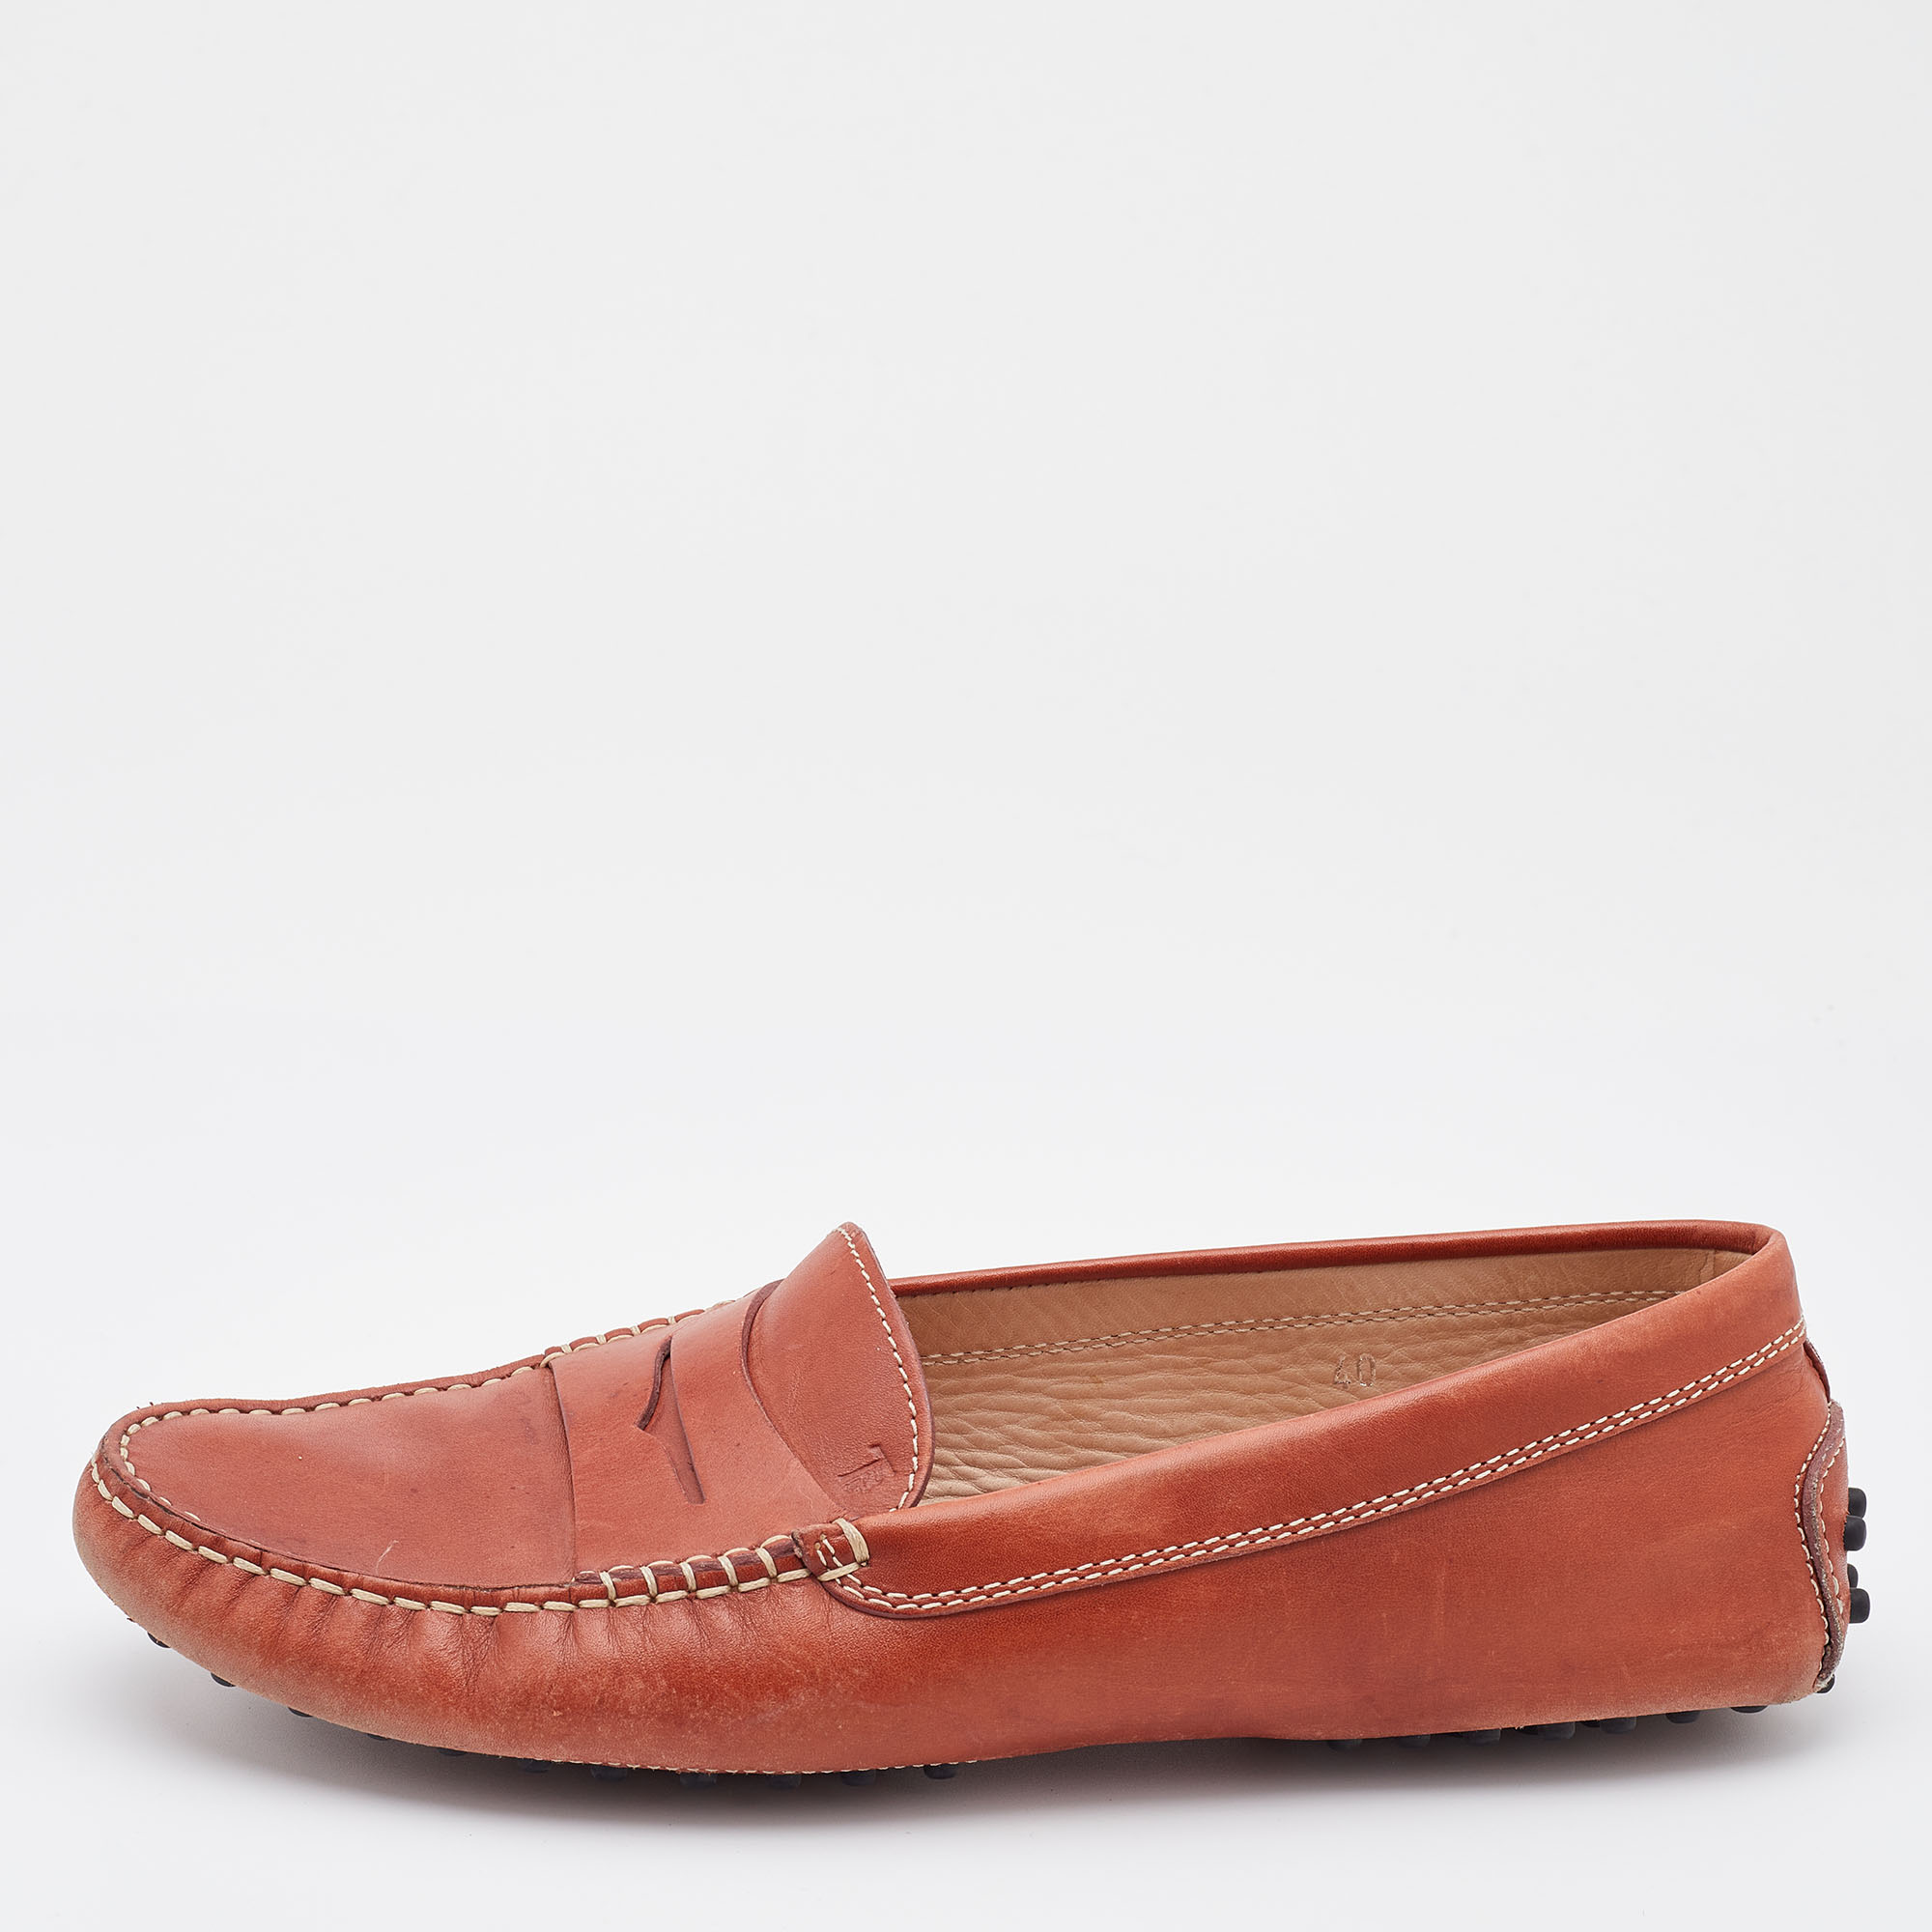 Pre-owned Tod's Rust Orange Leather City Gommino Slip On Loafers Size 40